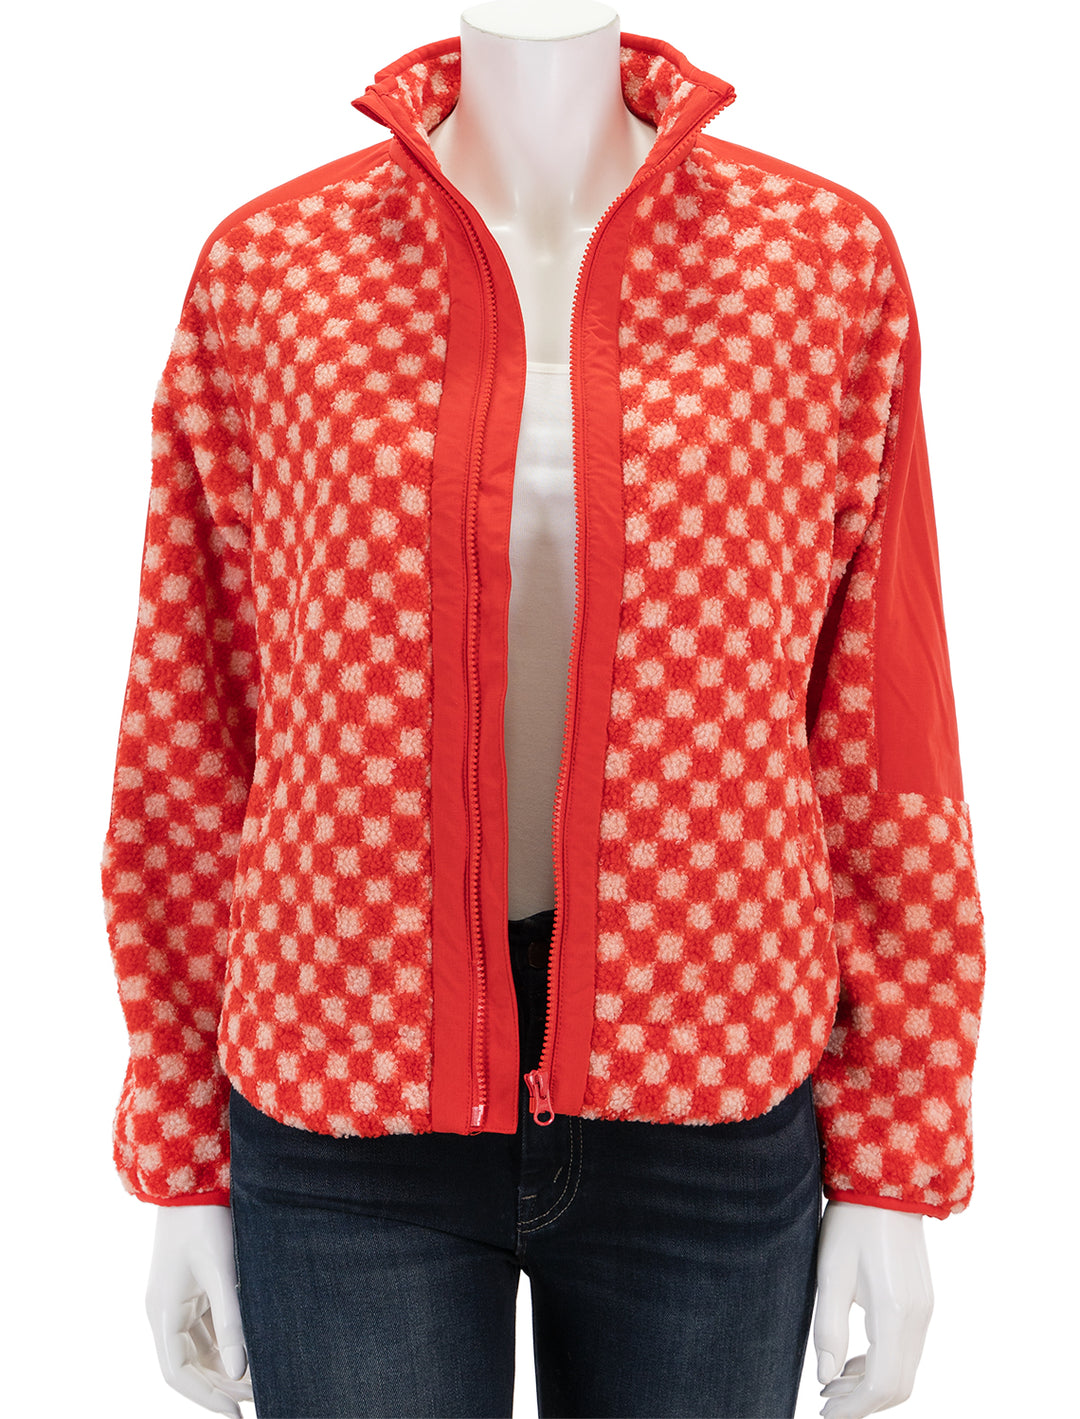 Front view of Marine Layer's blaire sherpa jacket in poinciana checkerboard, unzipped.